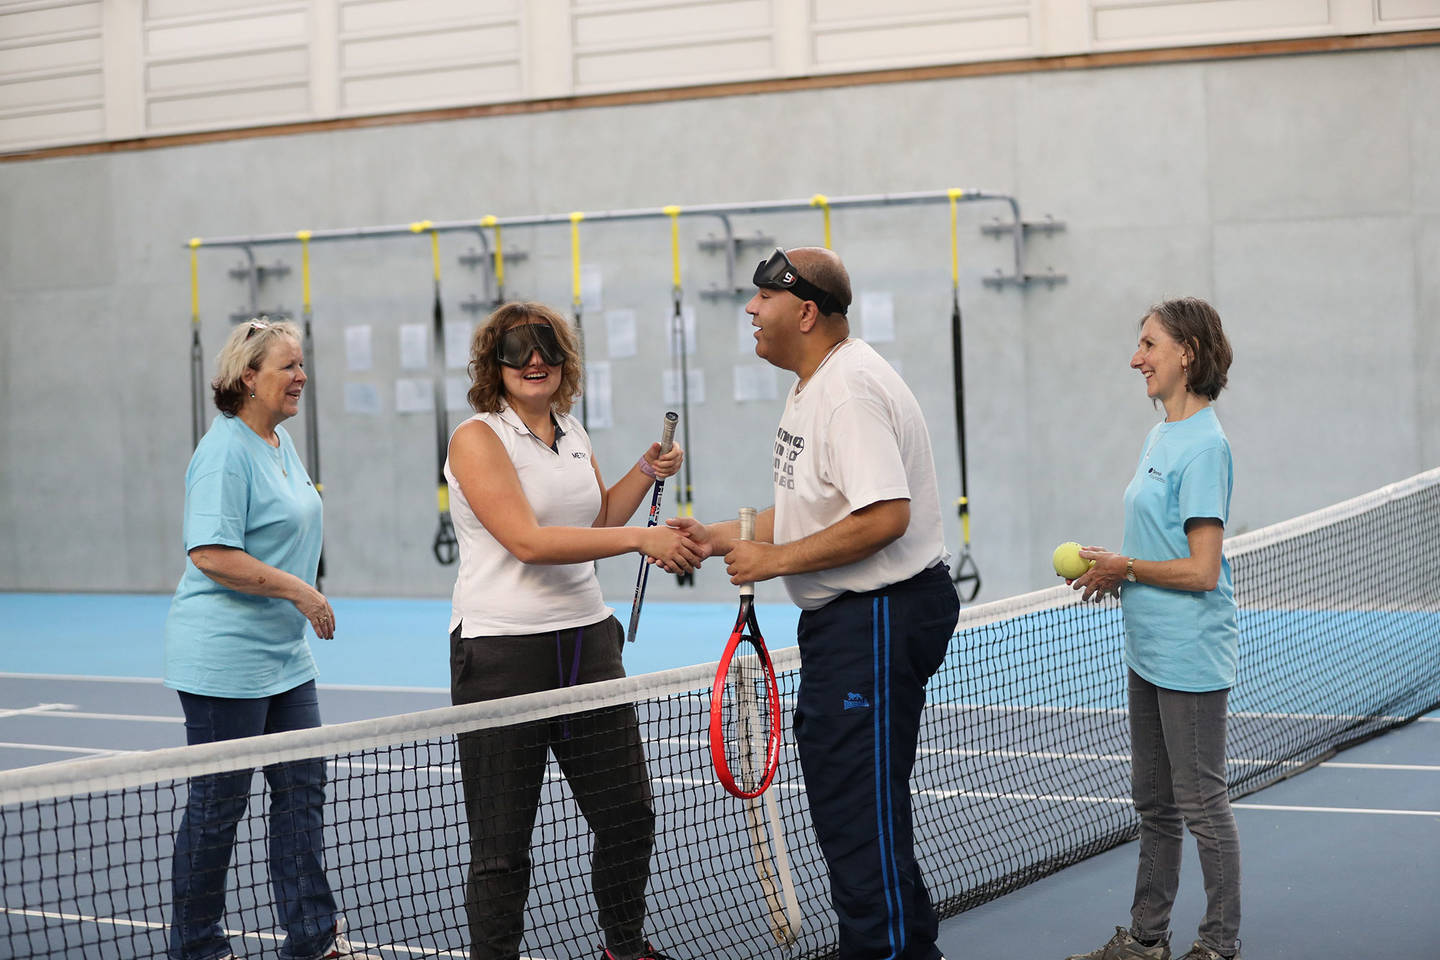 LTA Open Court visually impaired tennis game in sports hall.